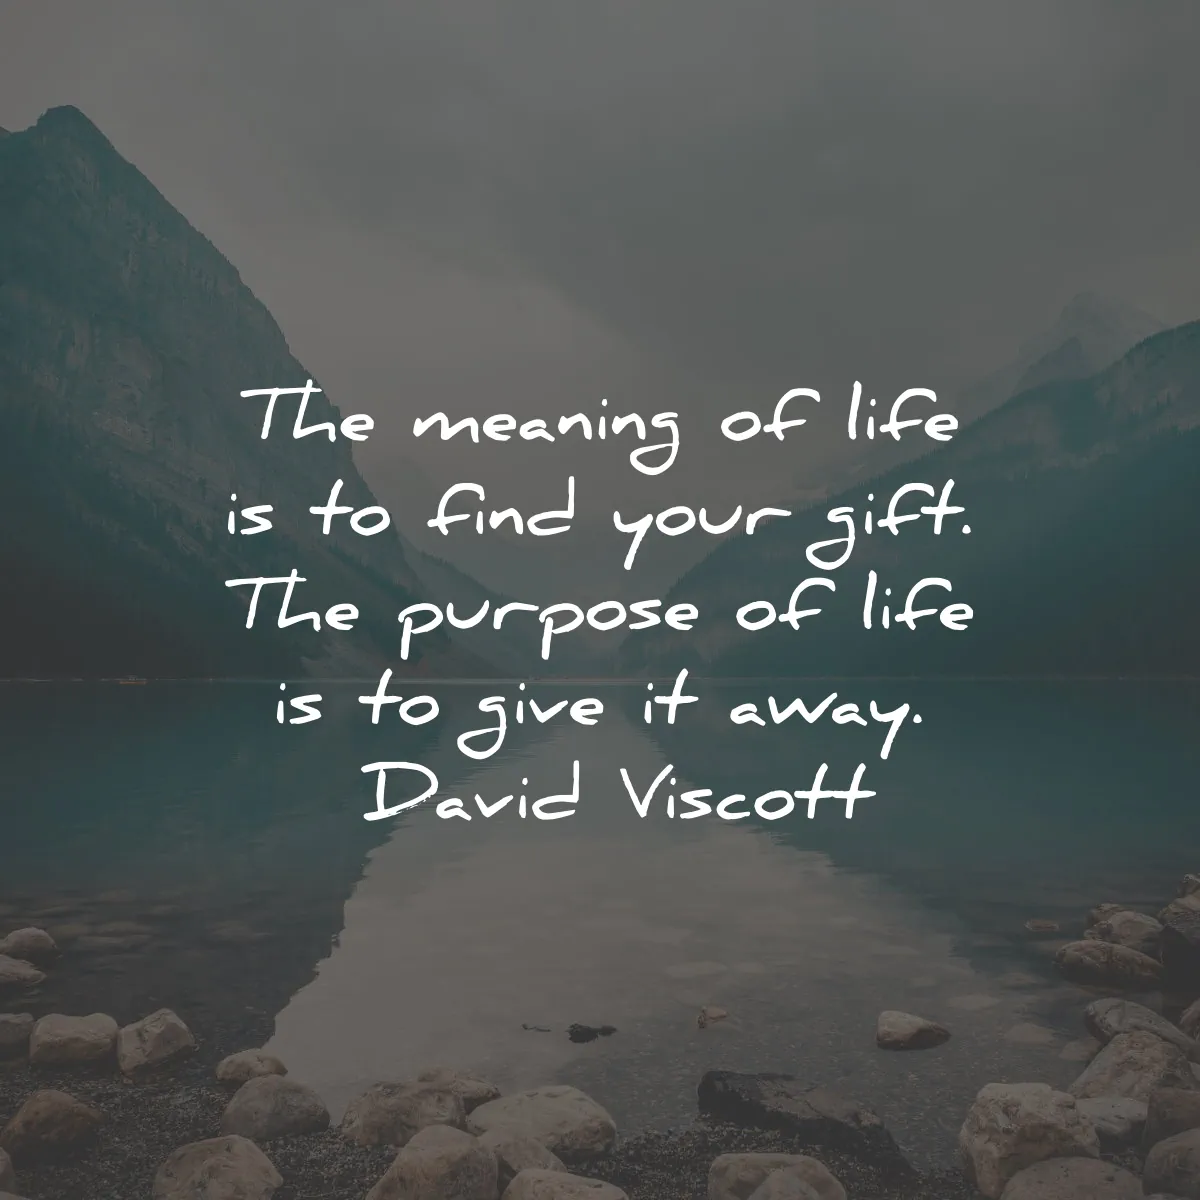 meaning of life quotes find gift purpose give away david viscott wisdom